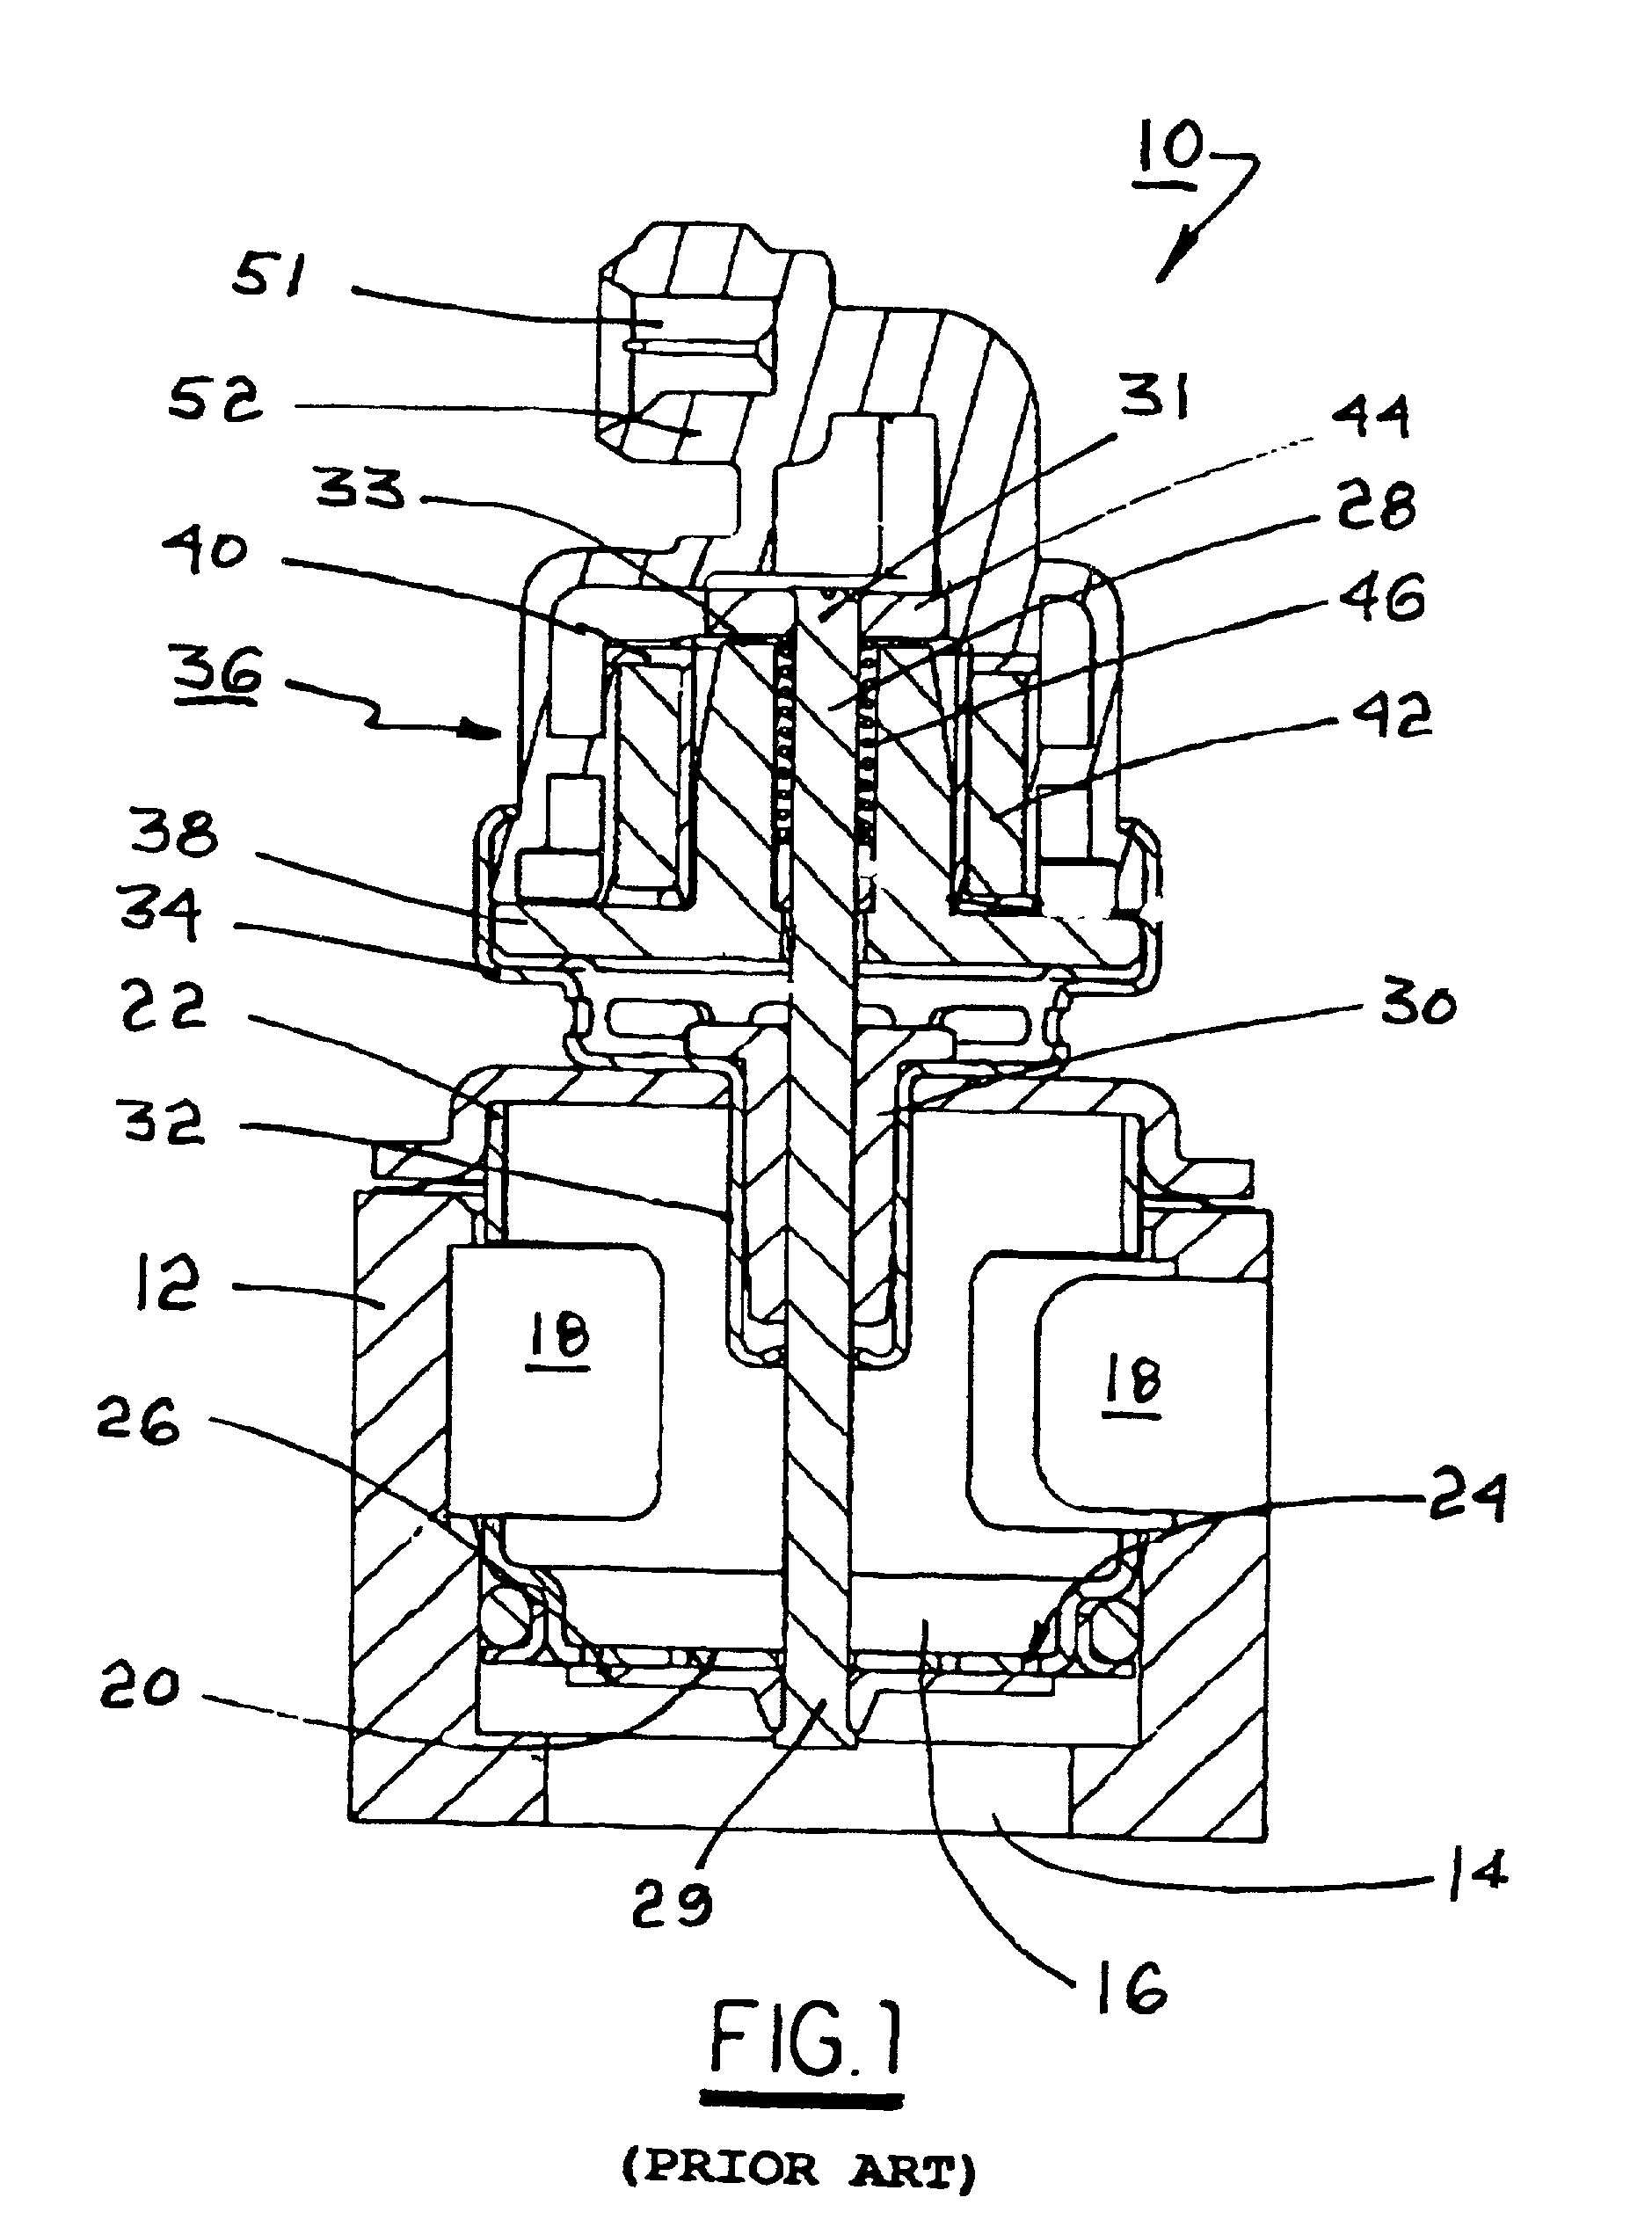 Short-stroke valve assembly for modulated pulsewidth flow control